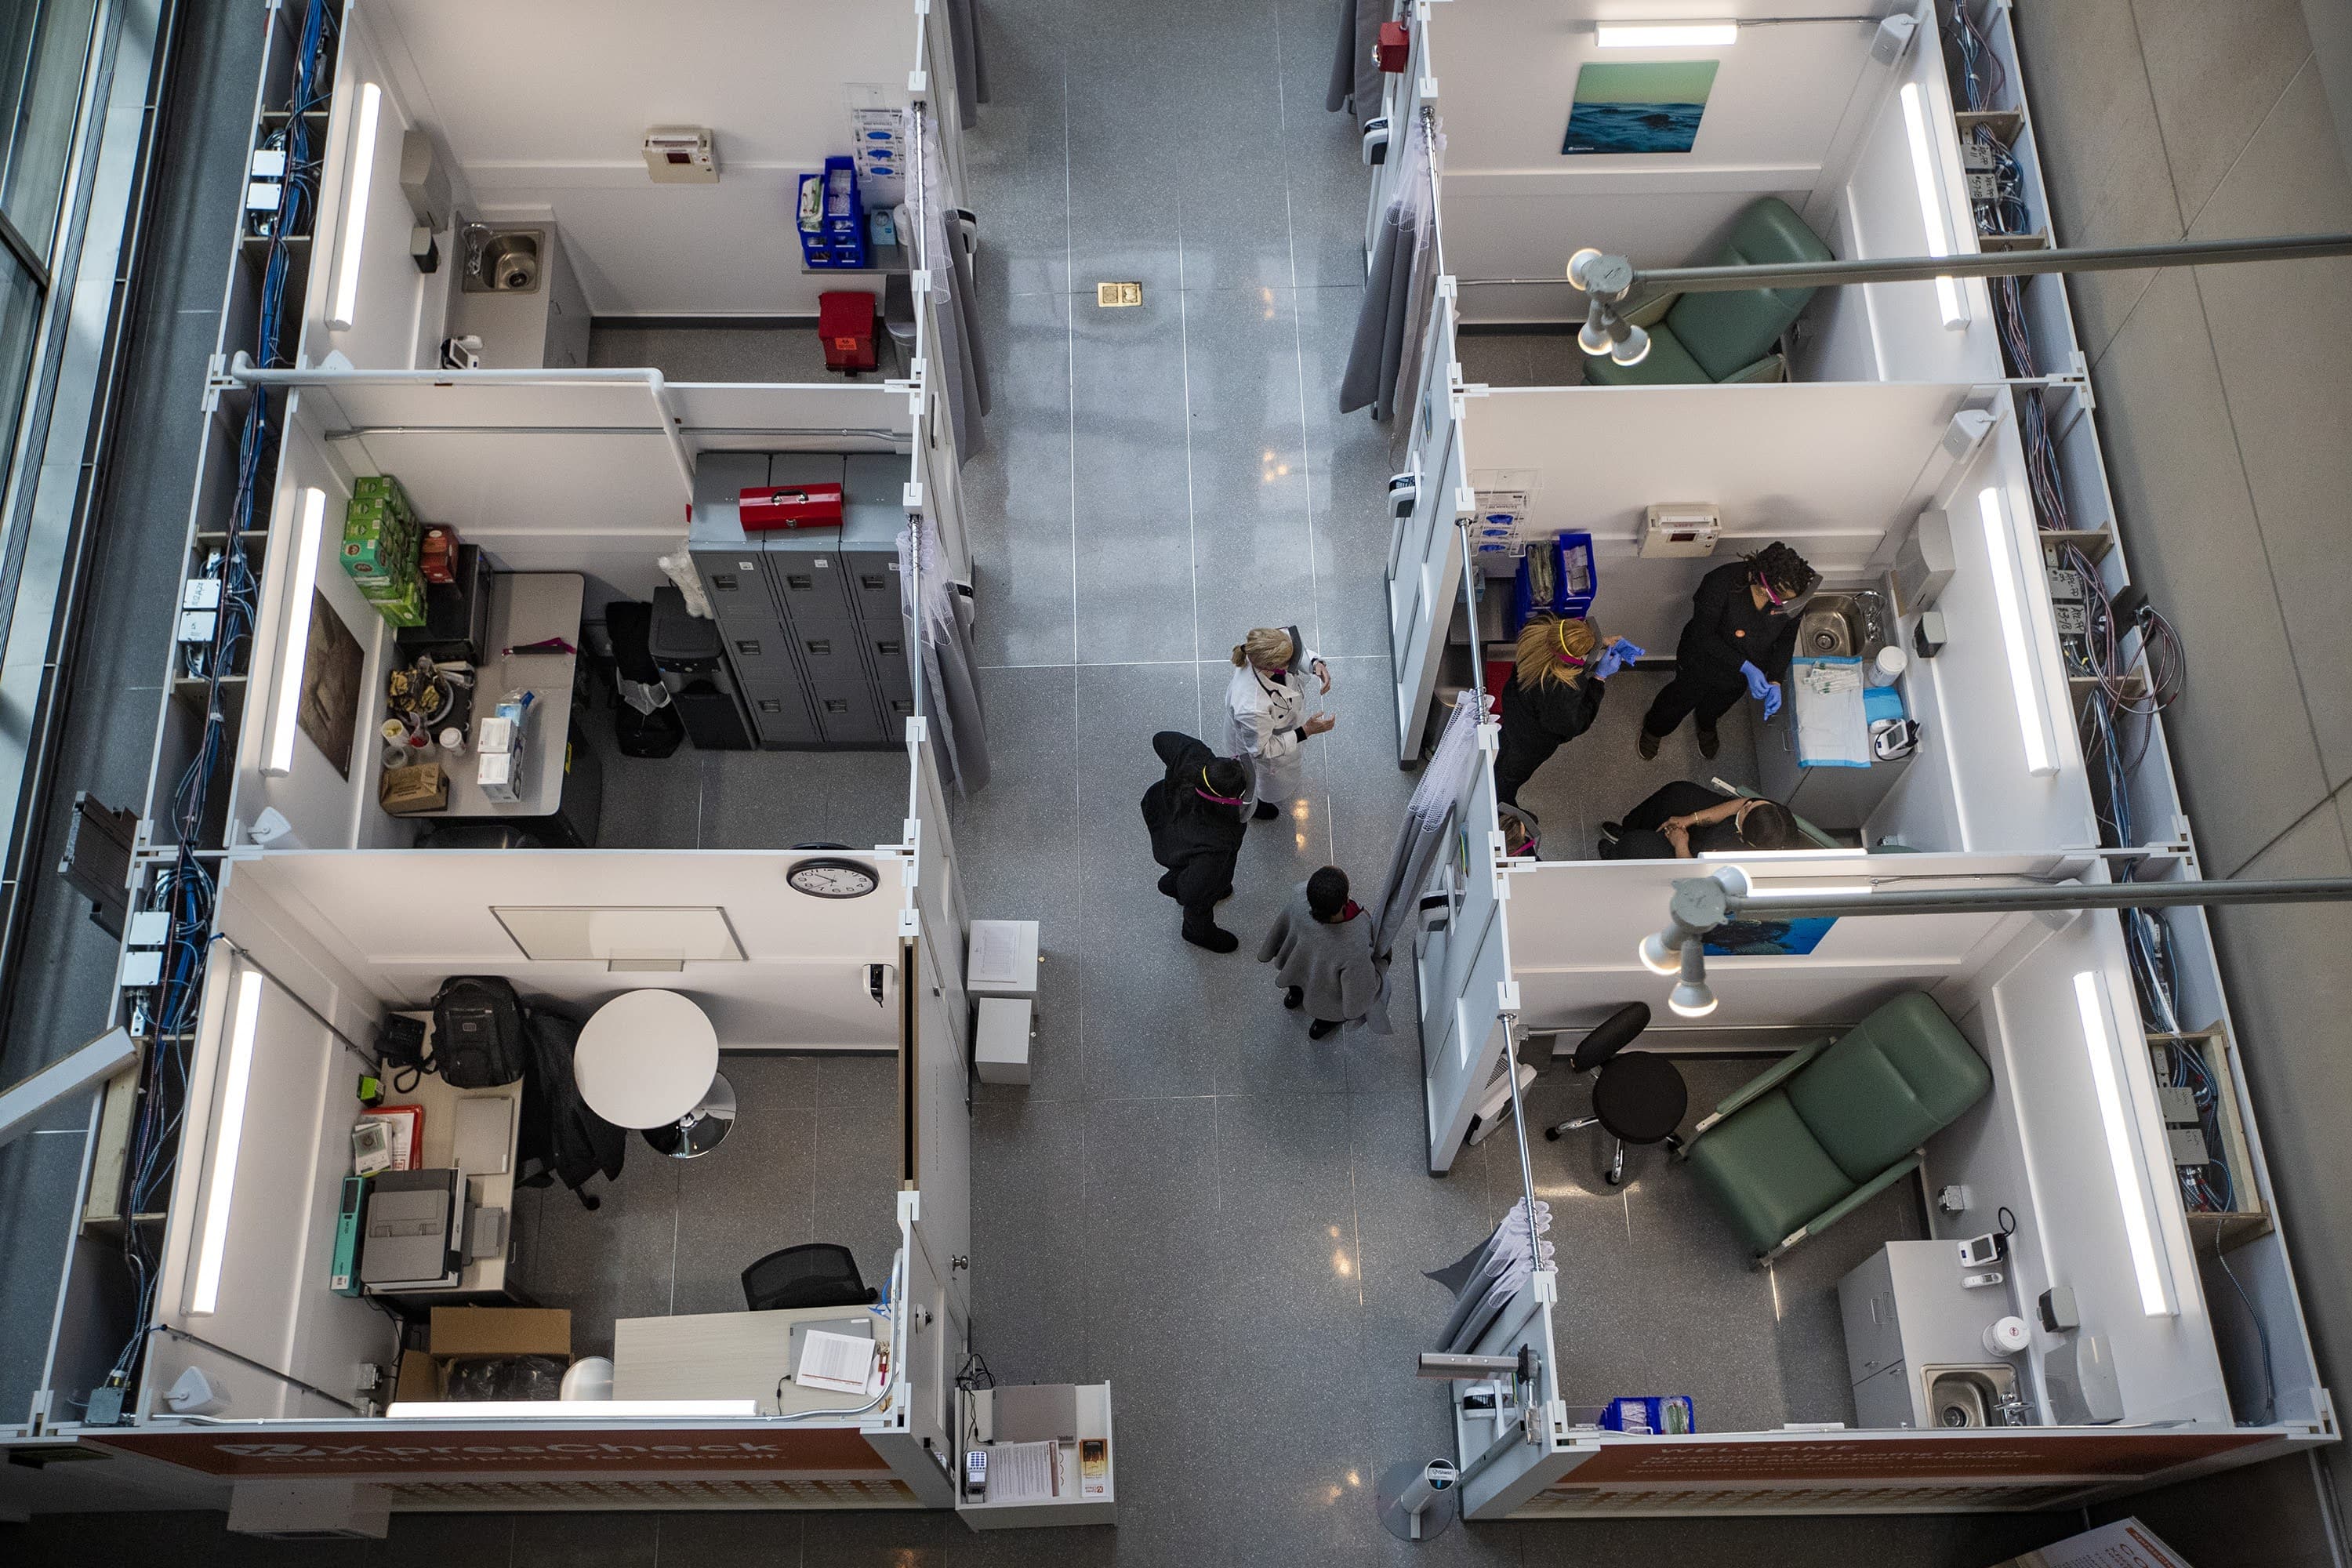 An overhead view of the XpresCheck COVID testing facility in Terminal E at Logan Airport on Wednesday. (Jesse Costa/WBUR)